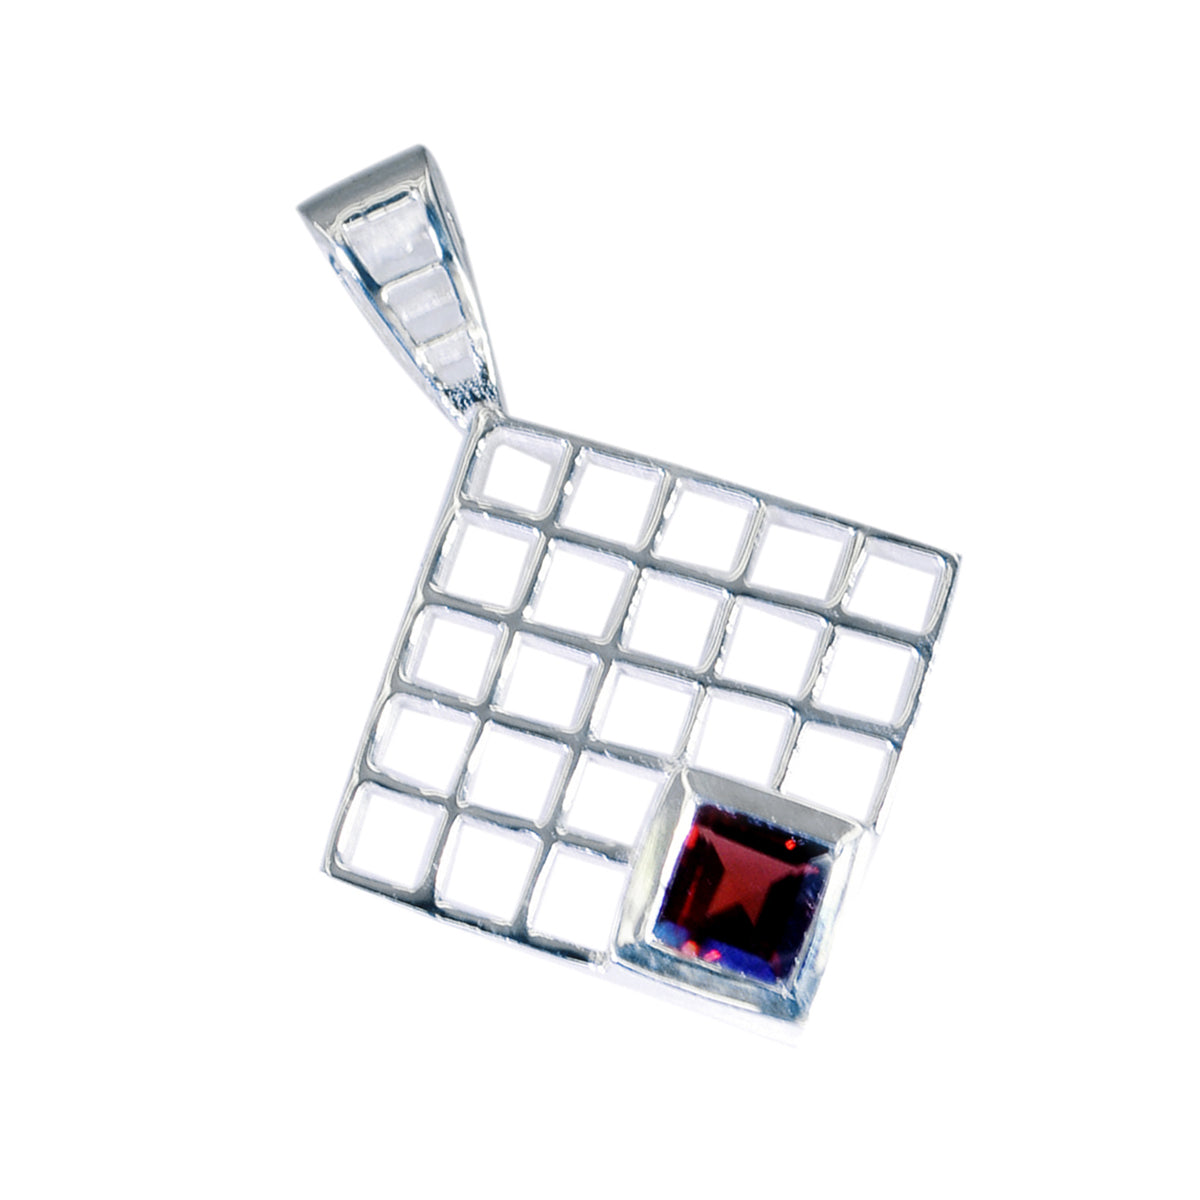 Riyo Beaut Gemstone Square Faceted Red Garnet 994 Sterling Silver Pendant Gift For Good Friday